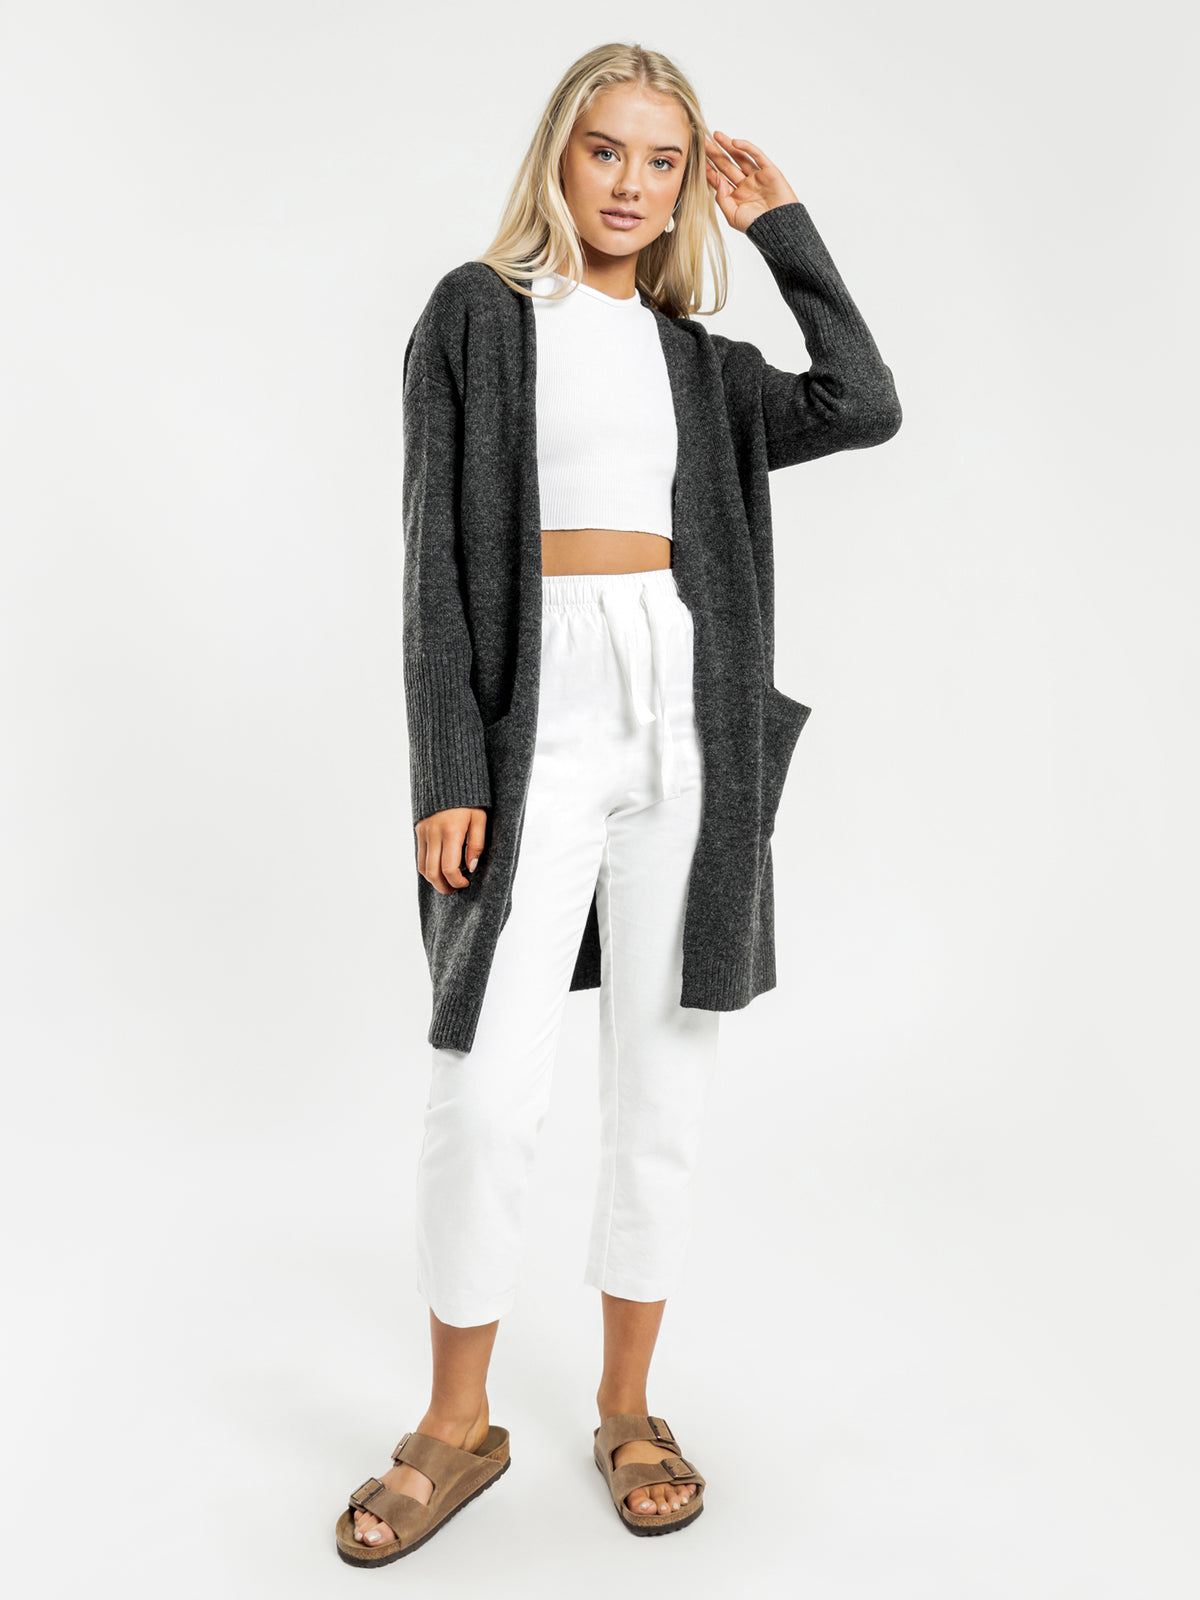 Avery Cardigan in Charcoal